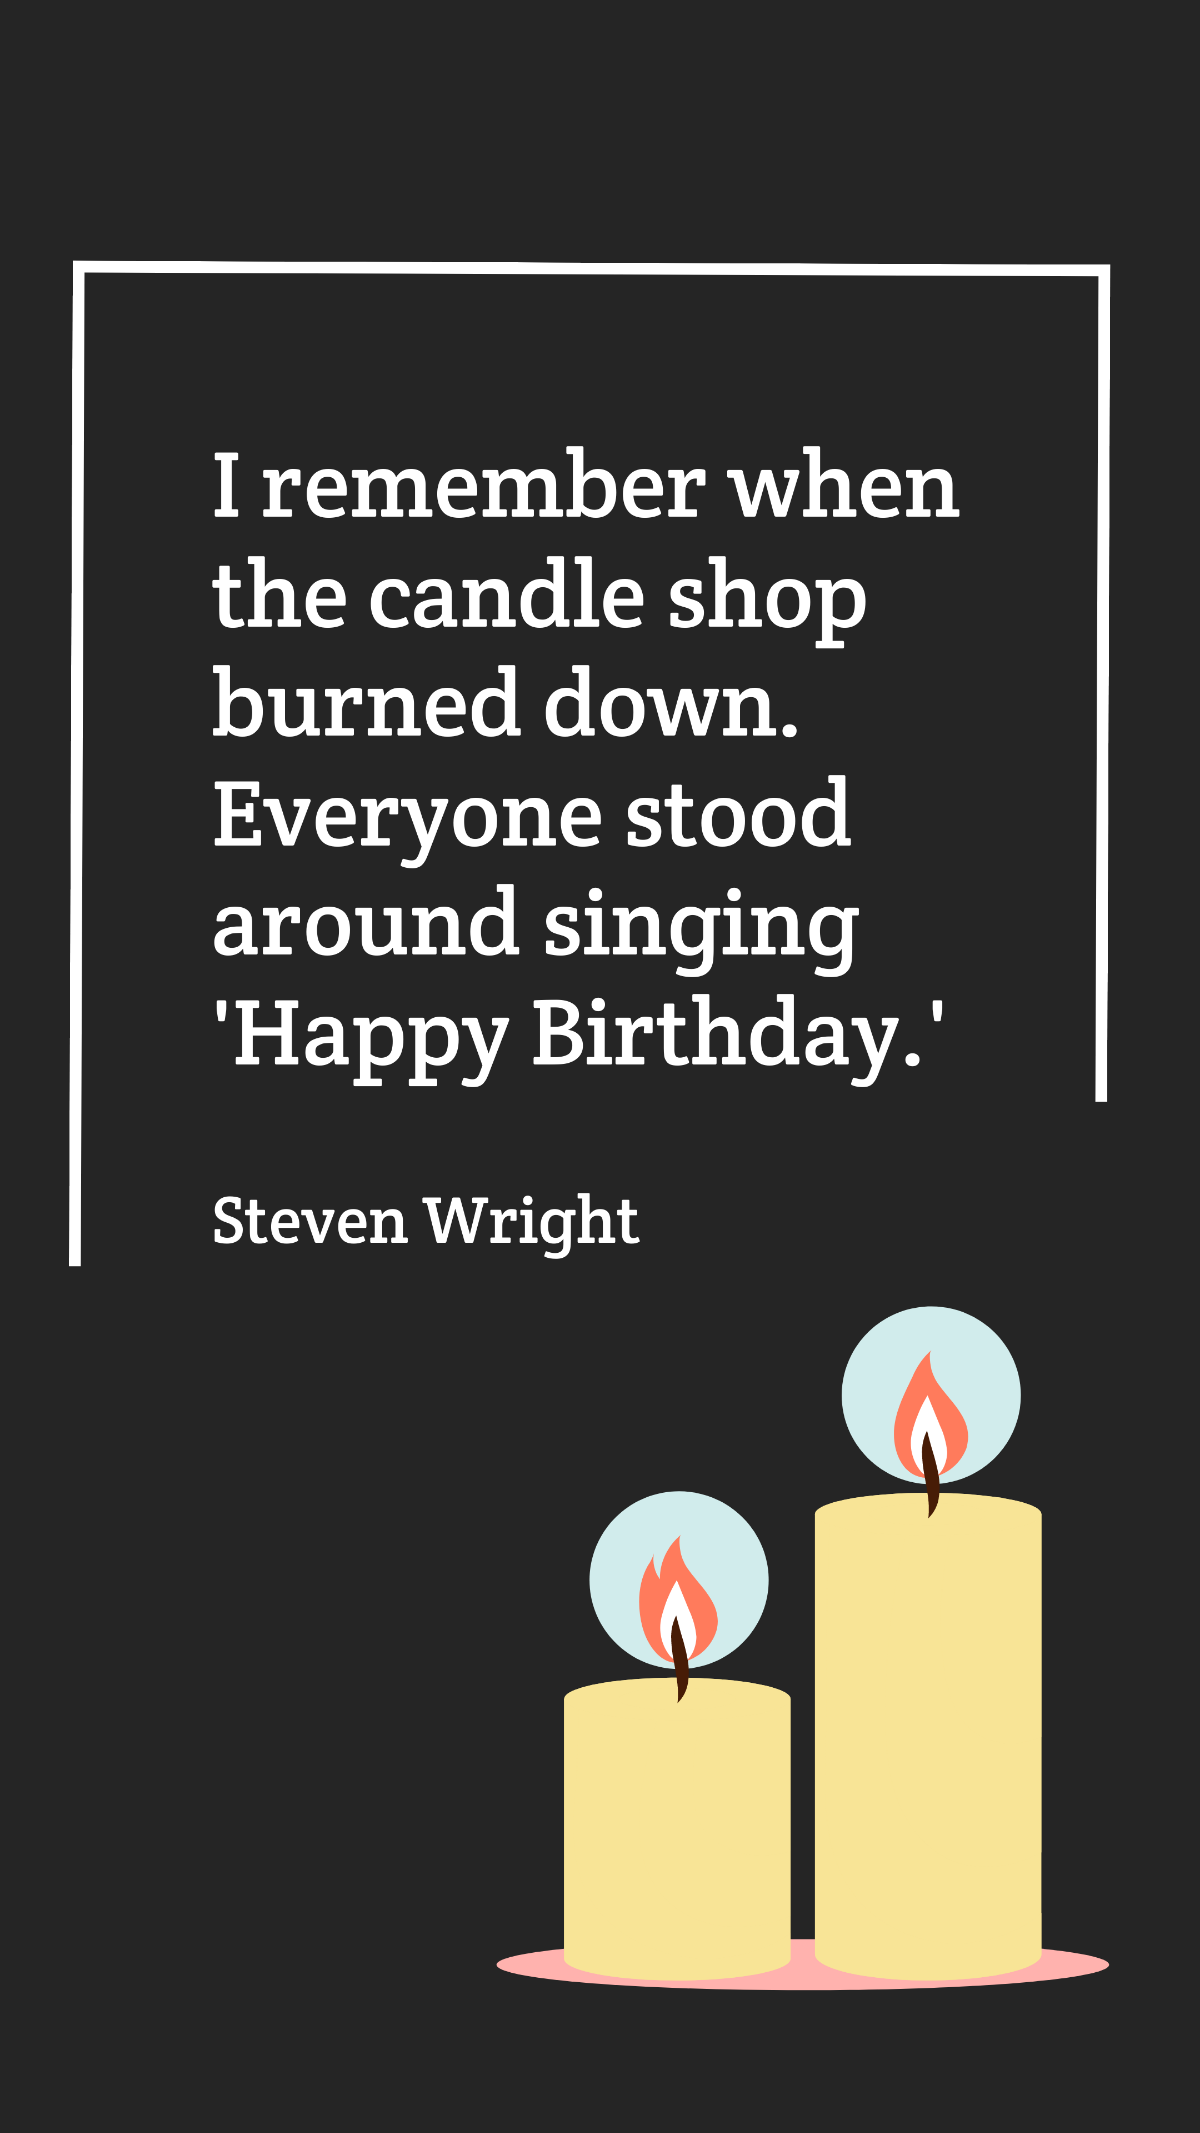 Steven Wright - I remember when the candle shop burned down. Everyone stood around singing 'Happy Birthday.' Template